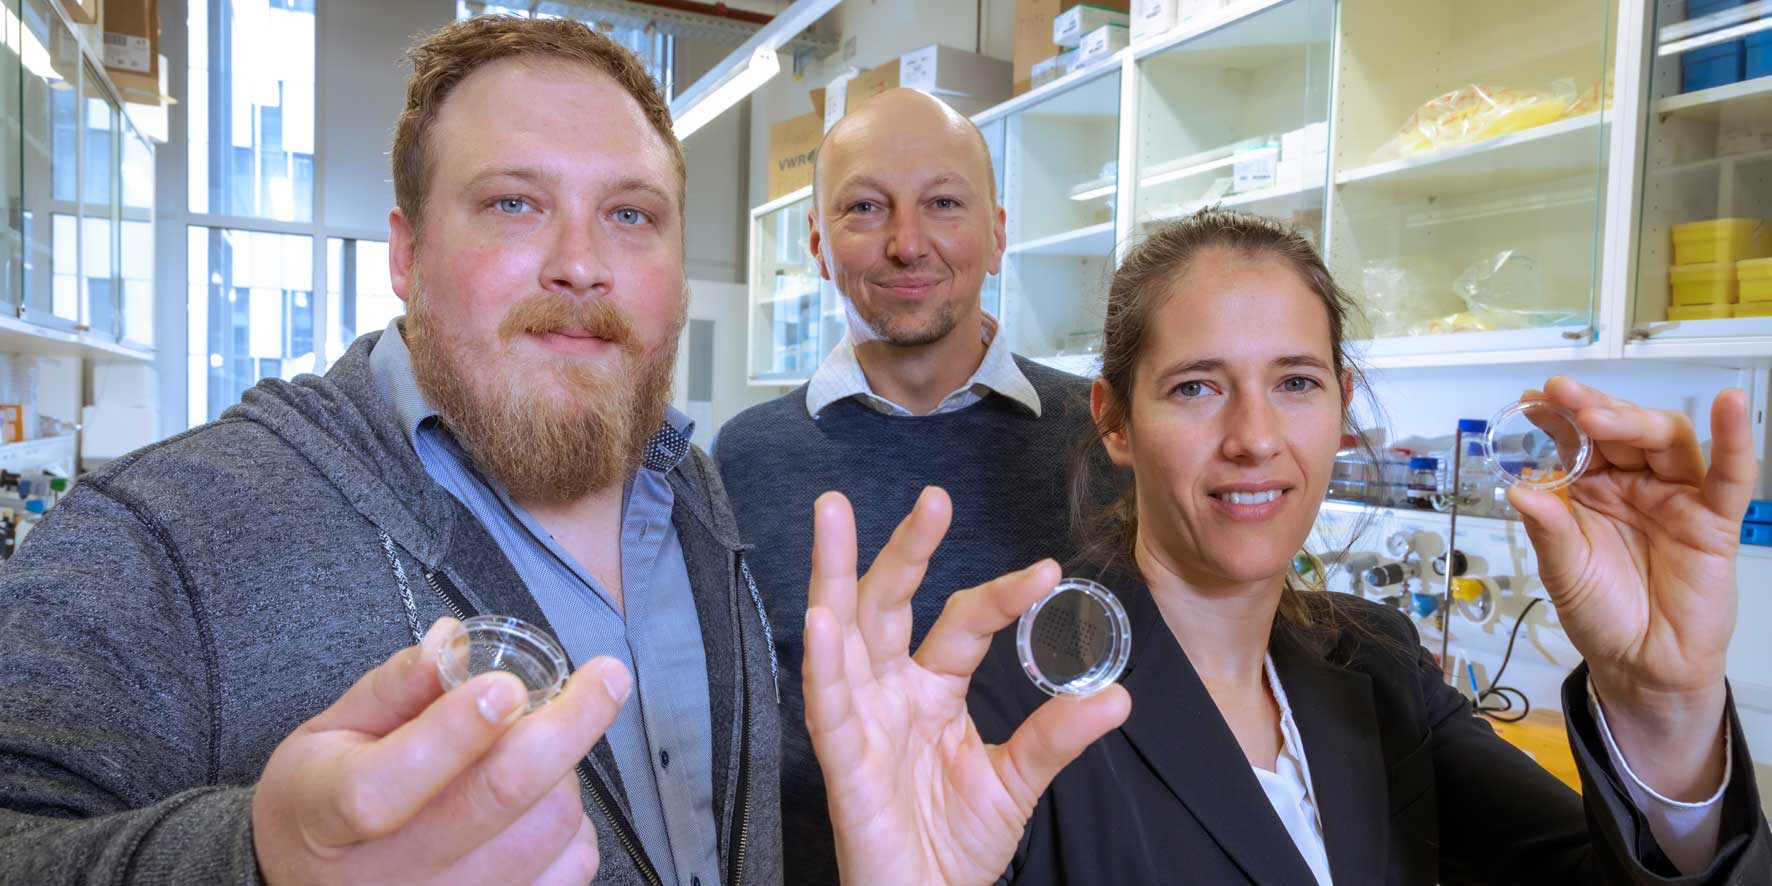 Two researchers from Med Uni Graz and a female researcher from TU Graz hold Petri dishes up to the camera